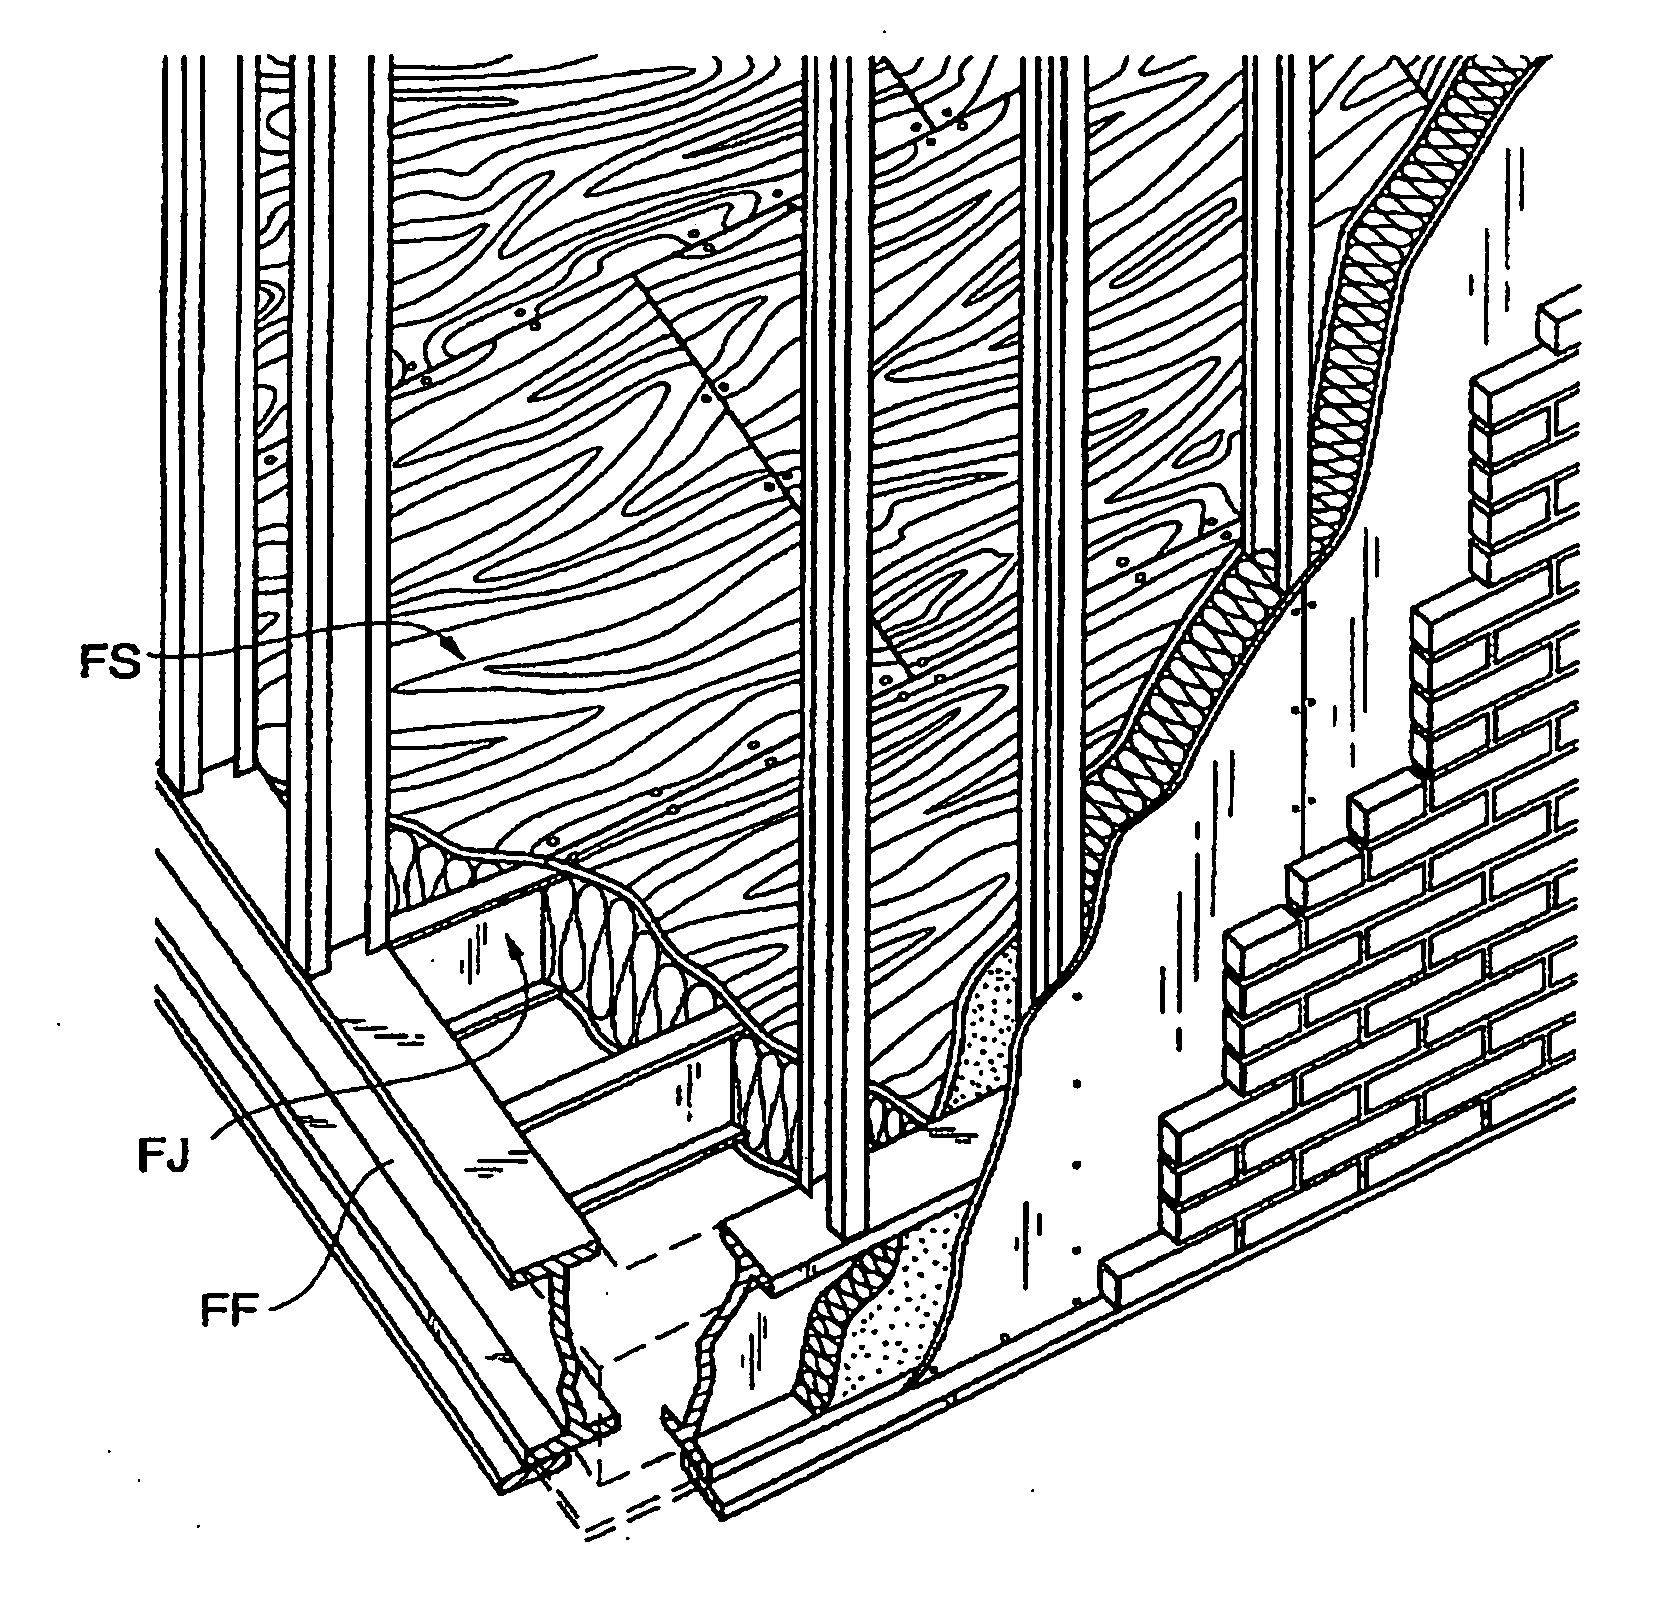 System for production of standard size dwellings using a satellite manufacturing facility